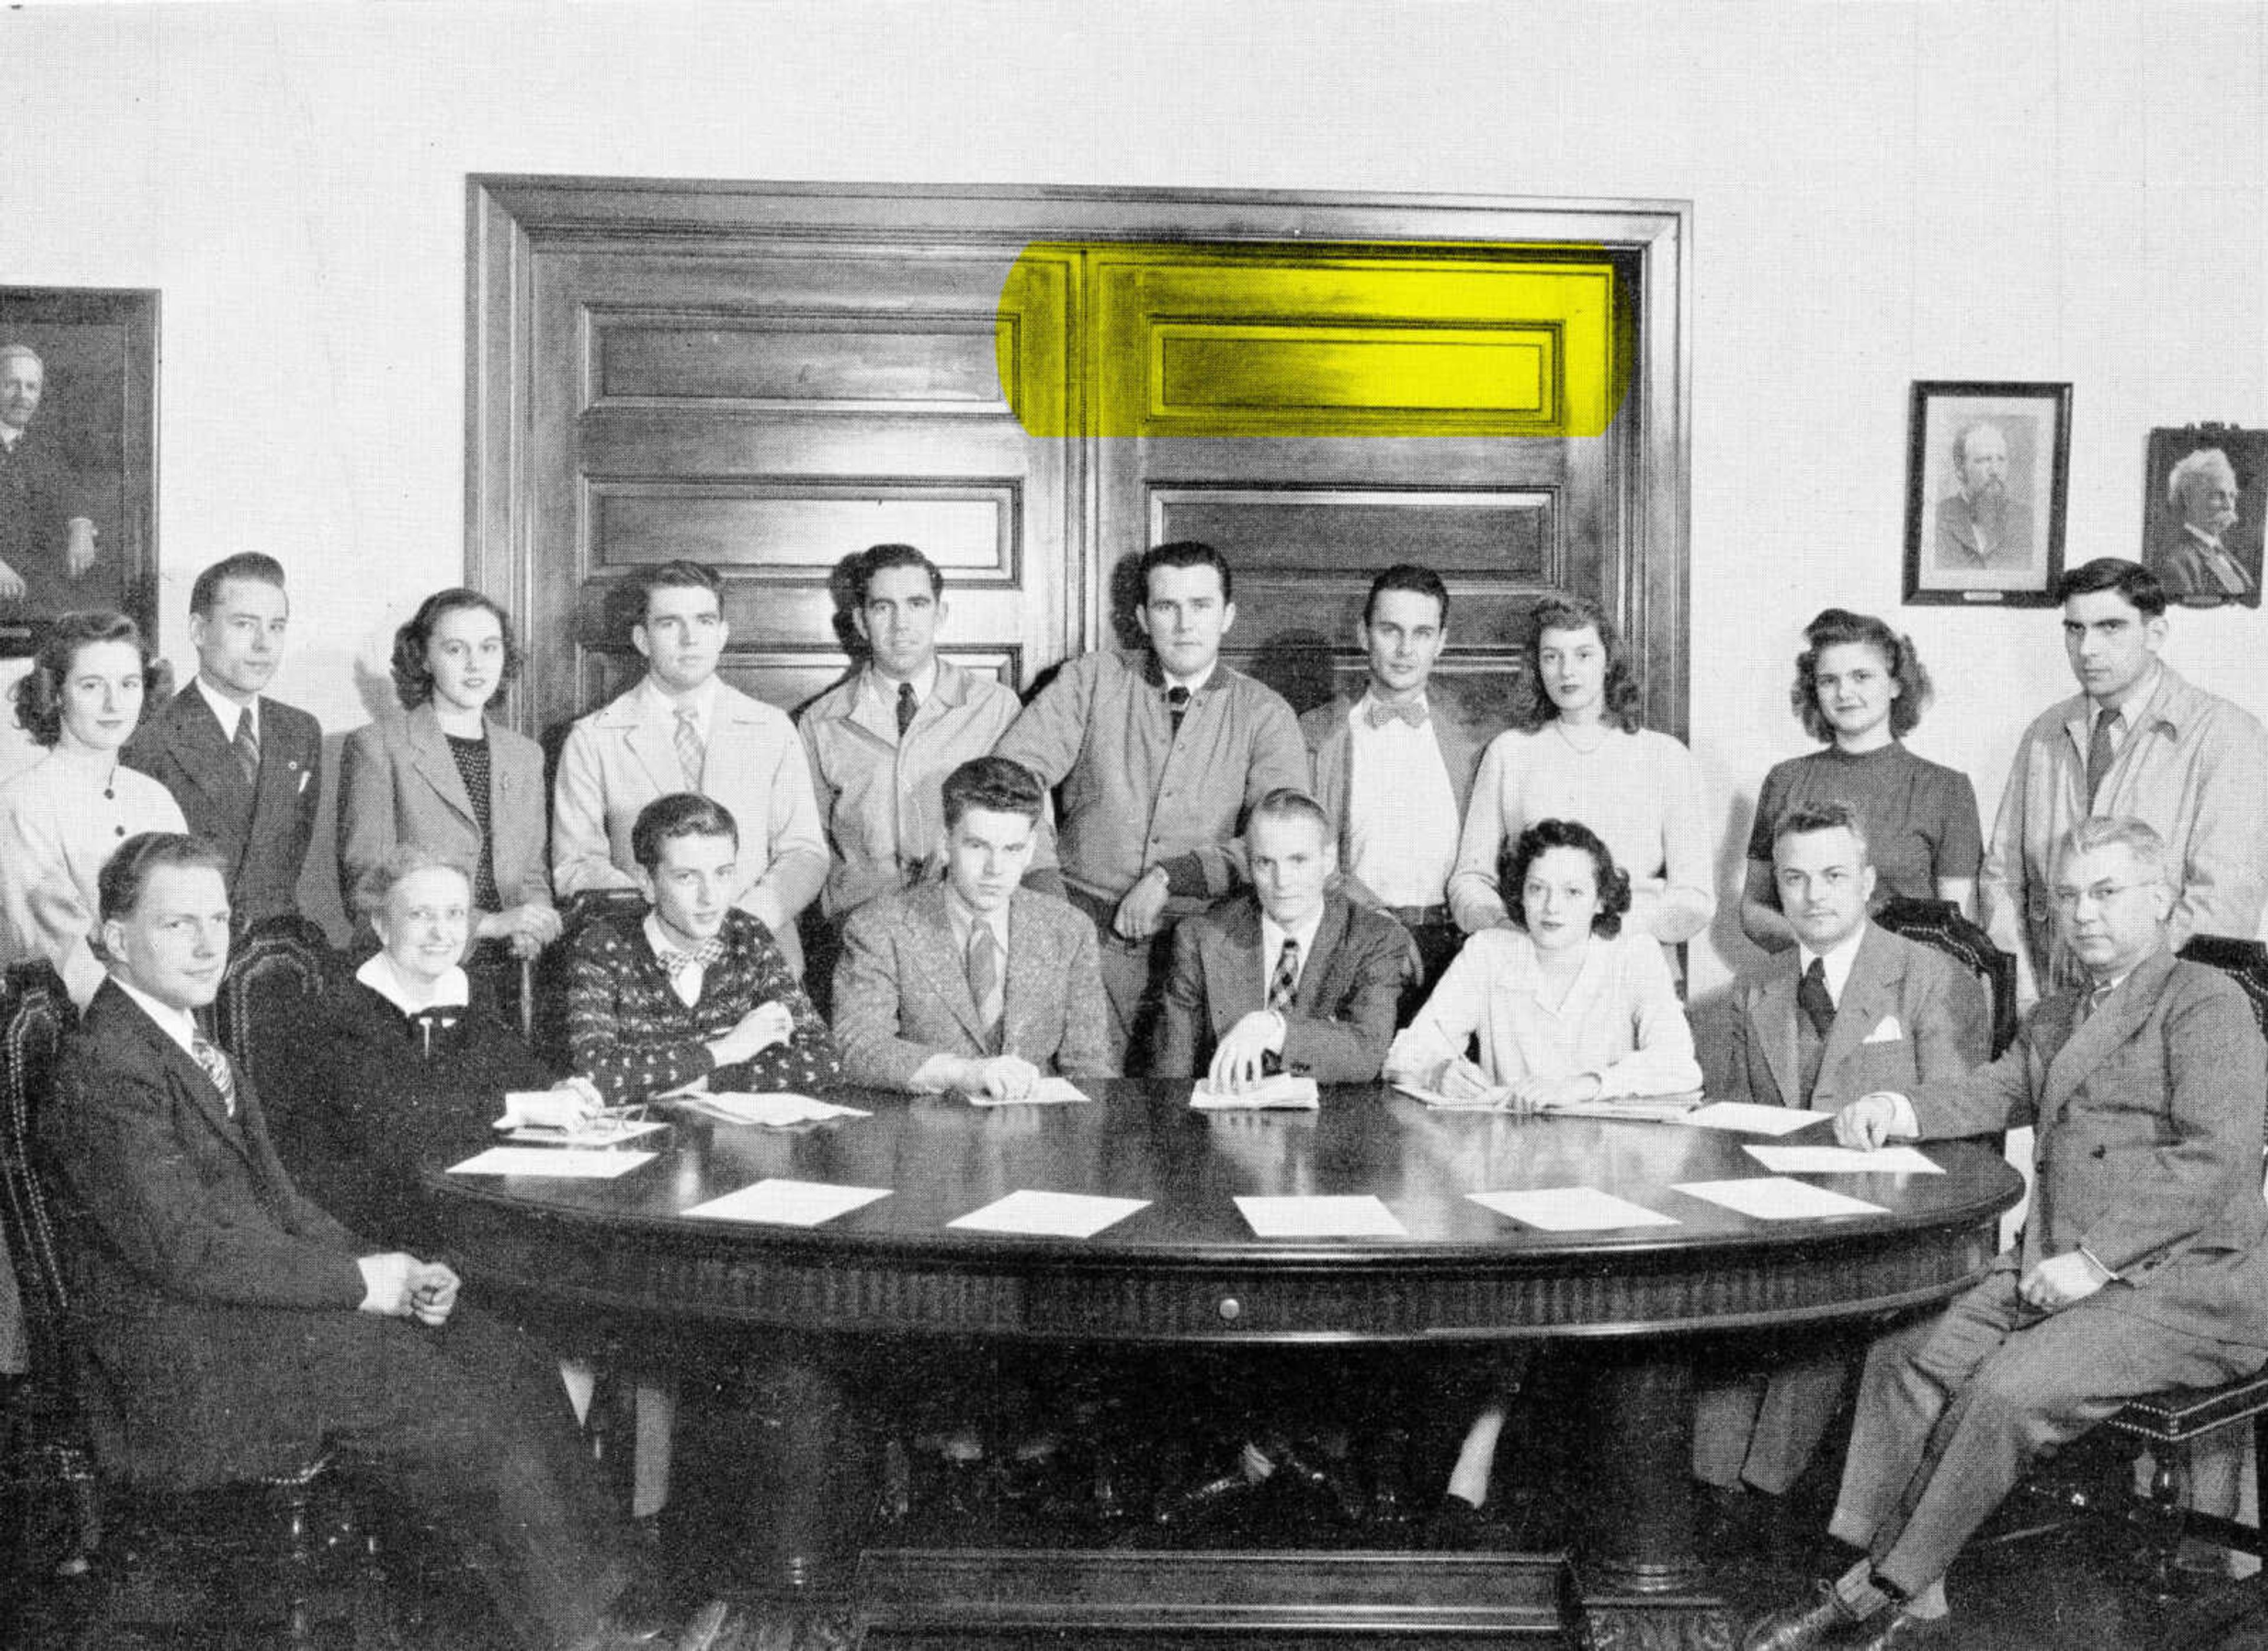 A photo of the very first student government on campus. Founded in 1946, they held the name Student Council far before they where the SGA of today.